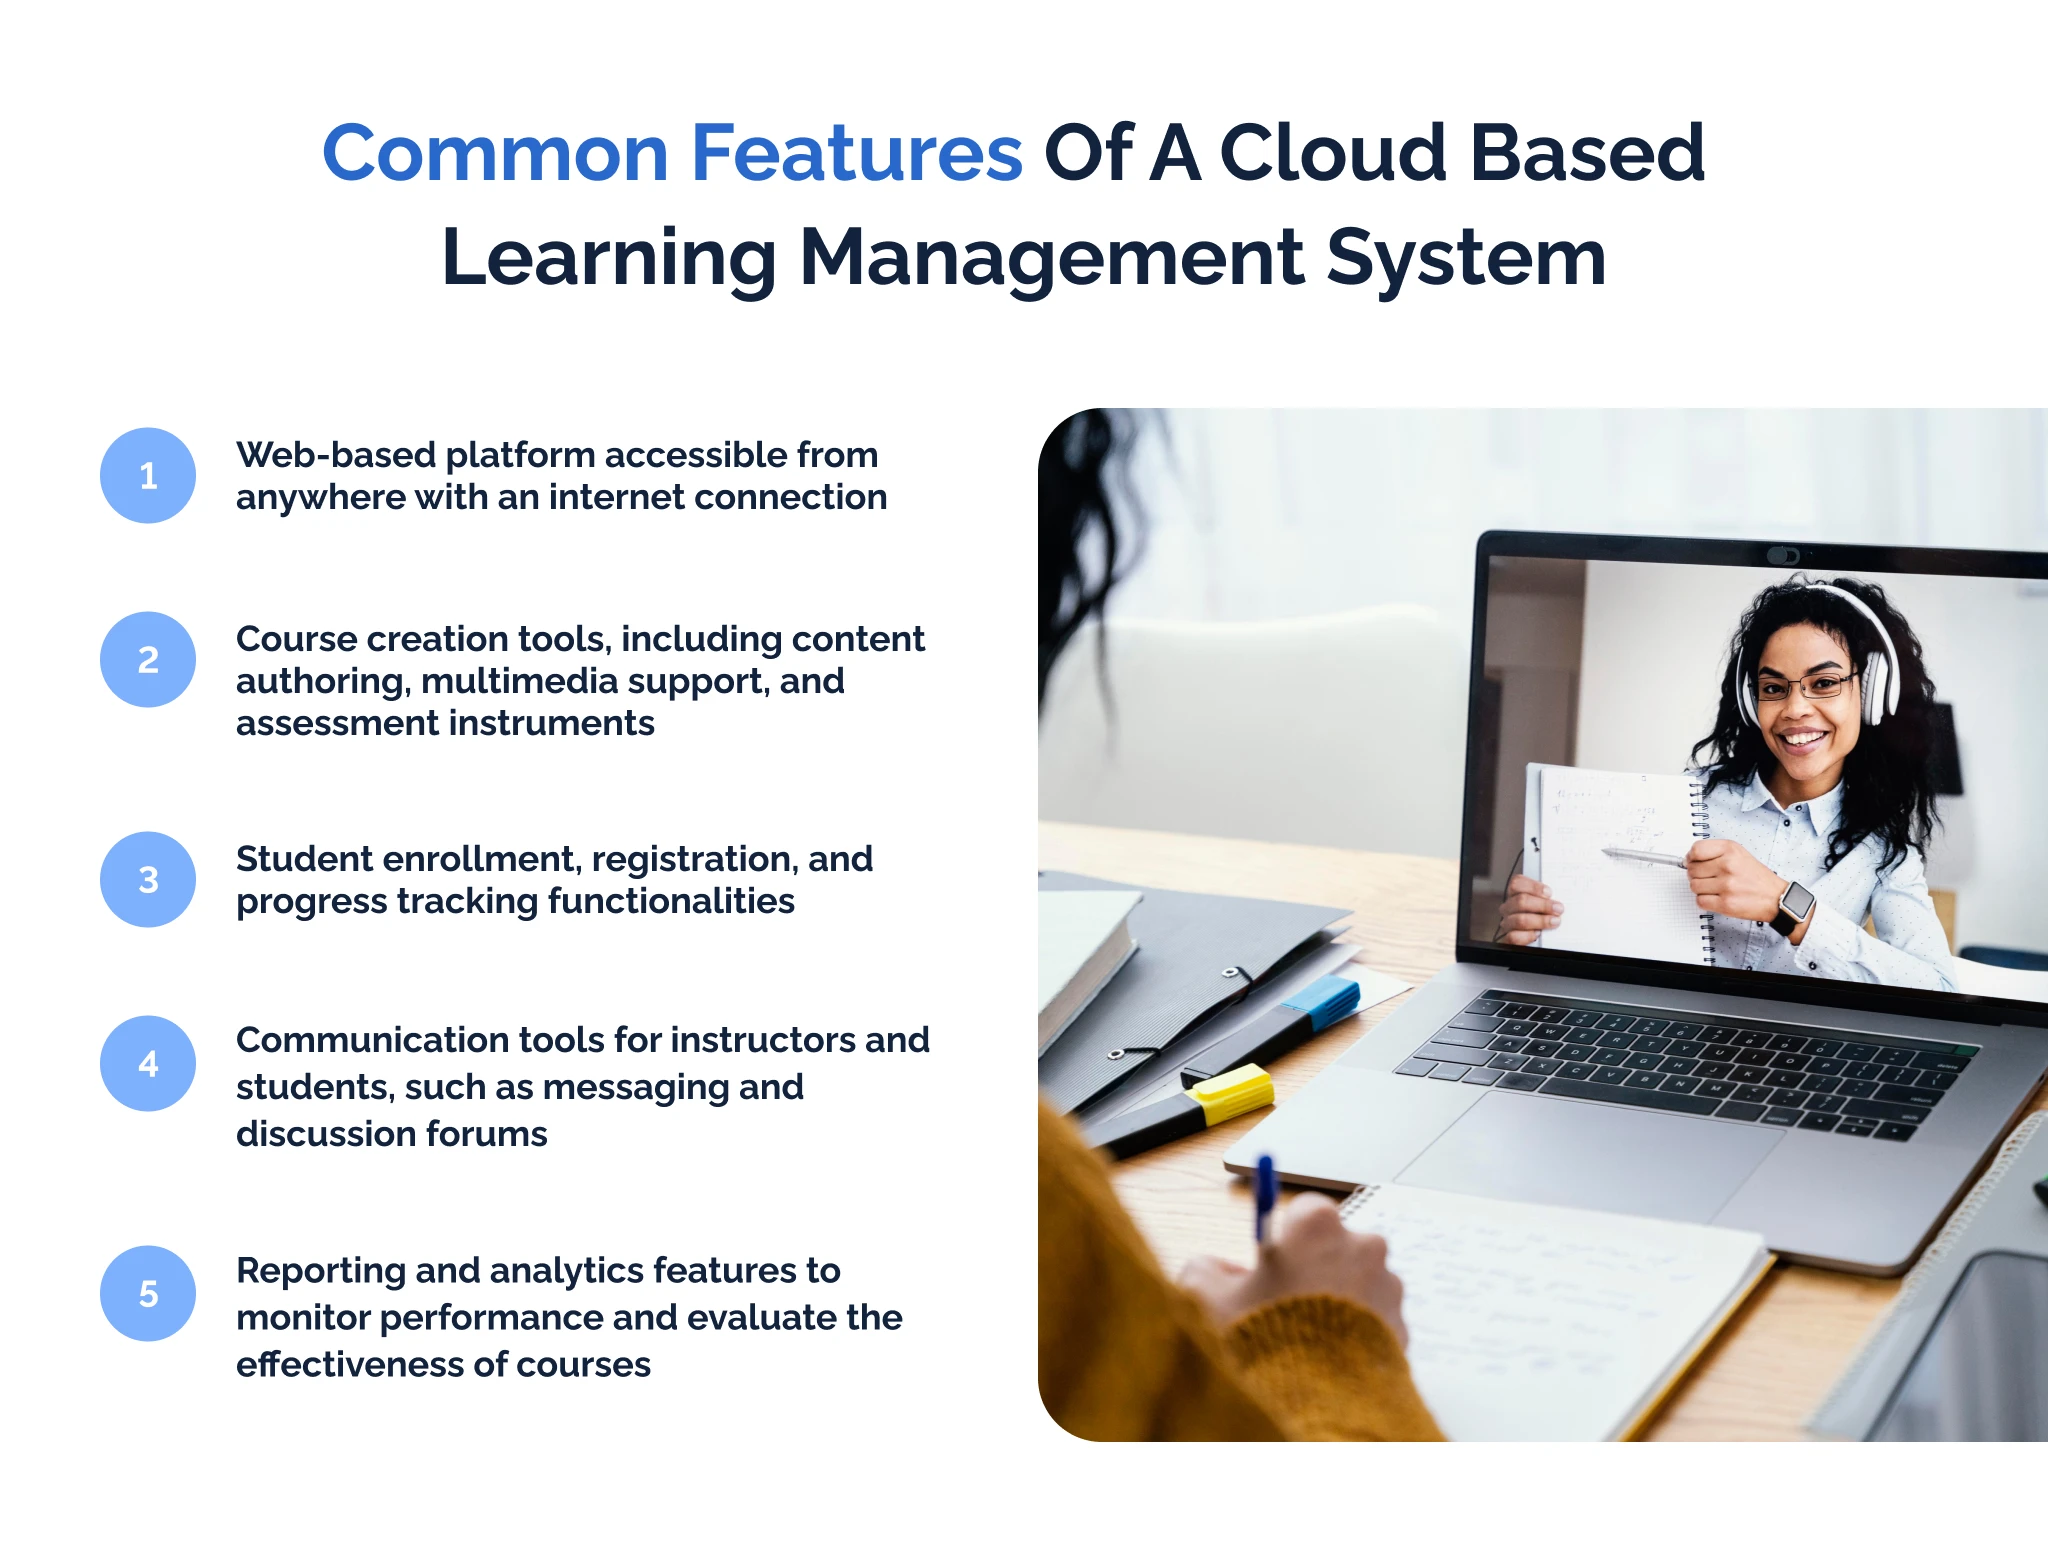 Common features of a cloud-based learning management system